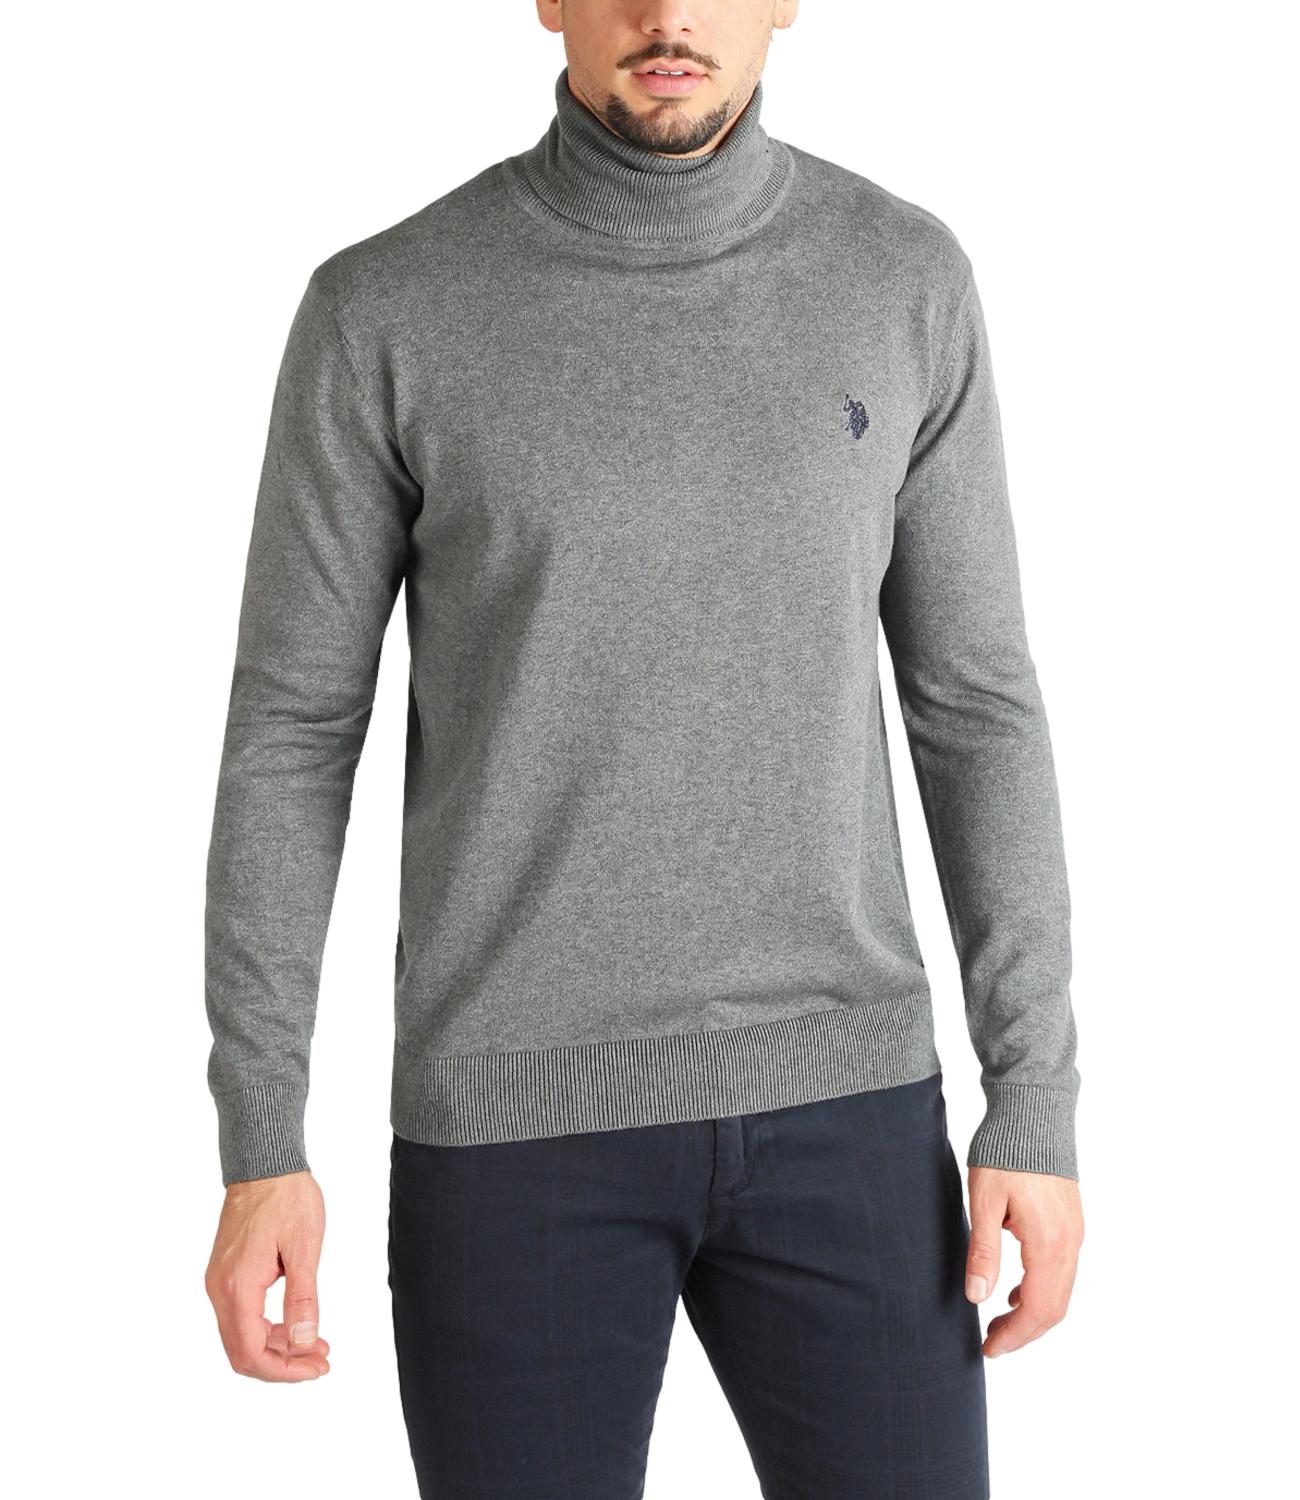 US Polo Assn gray men's sweater with black wool logo